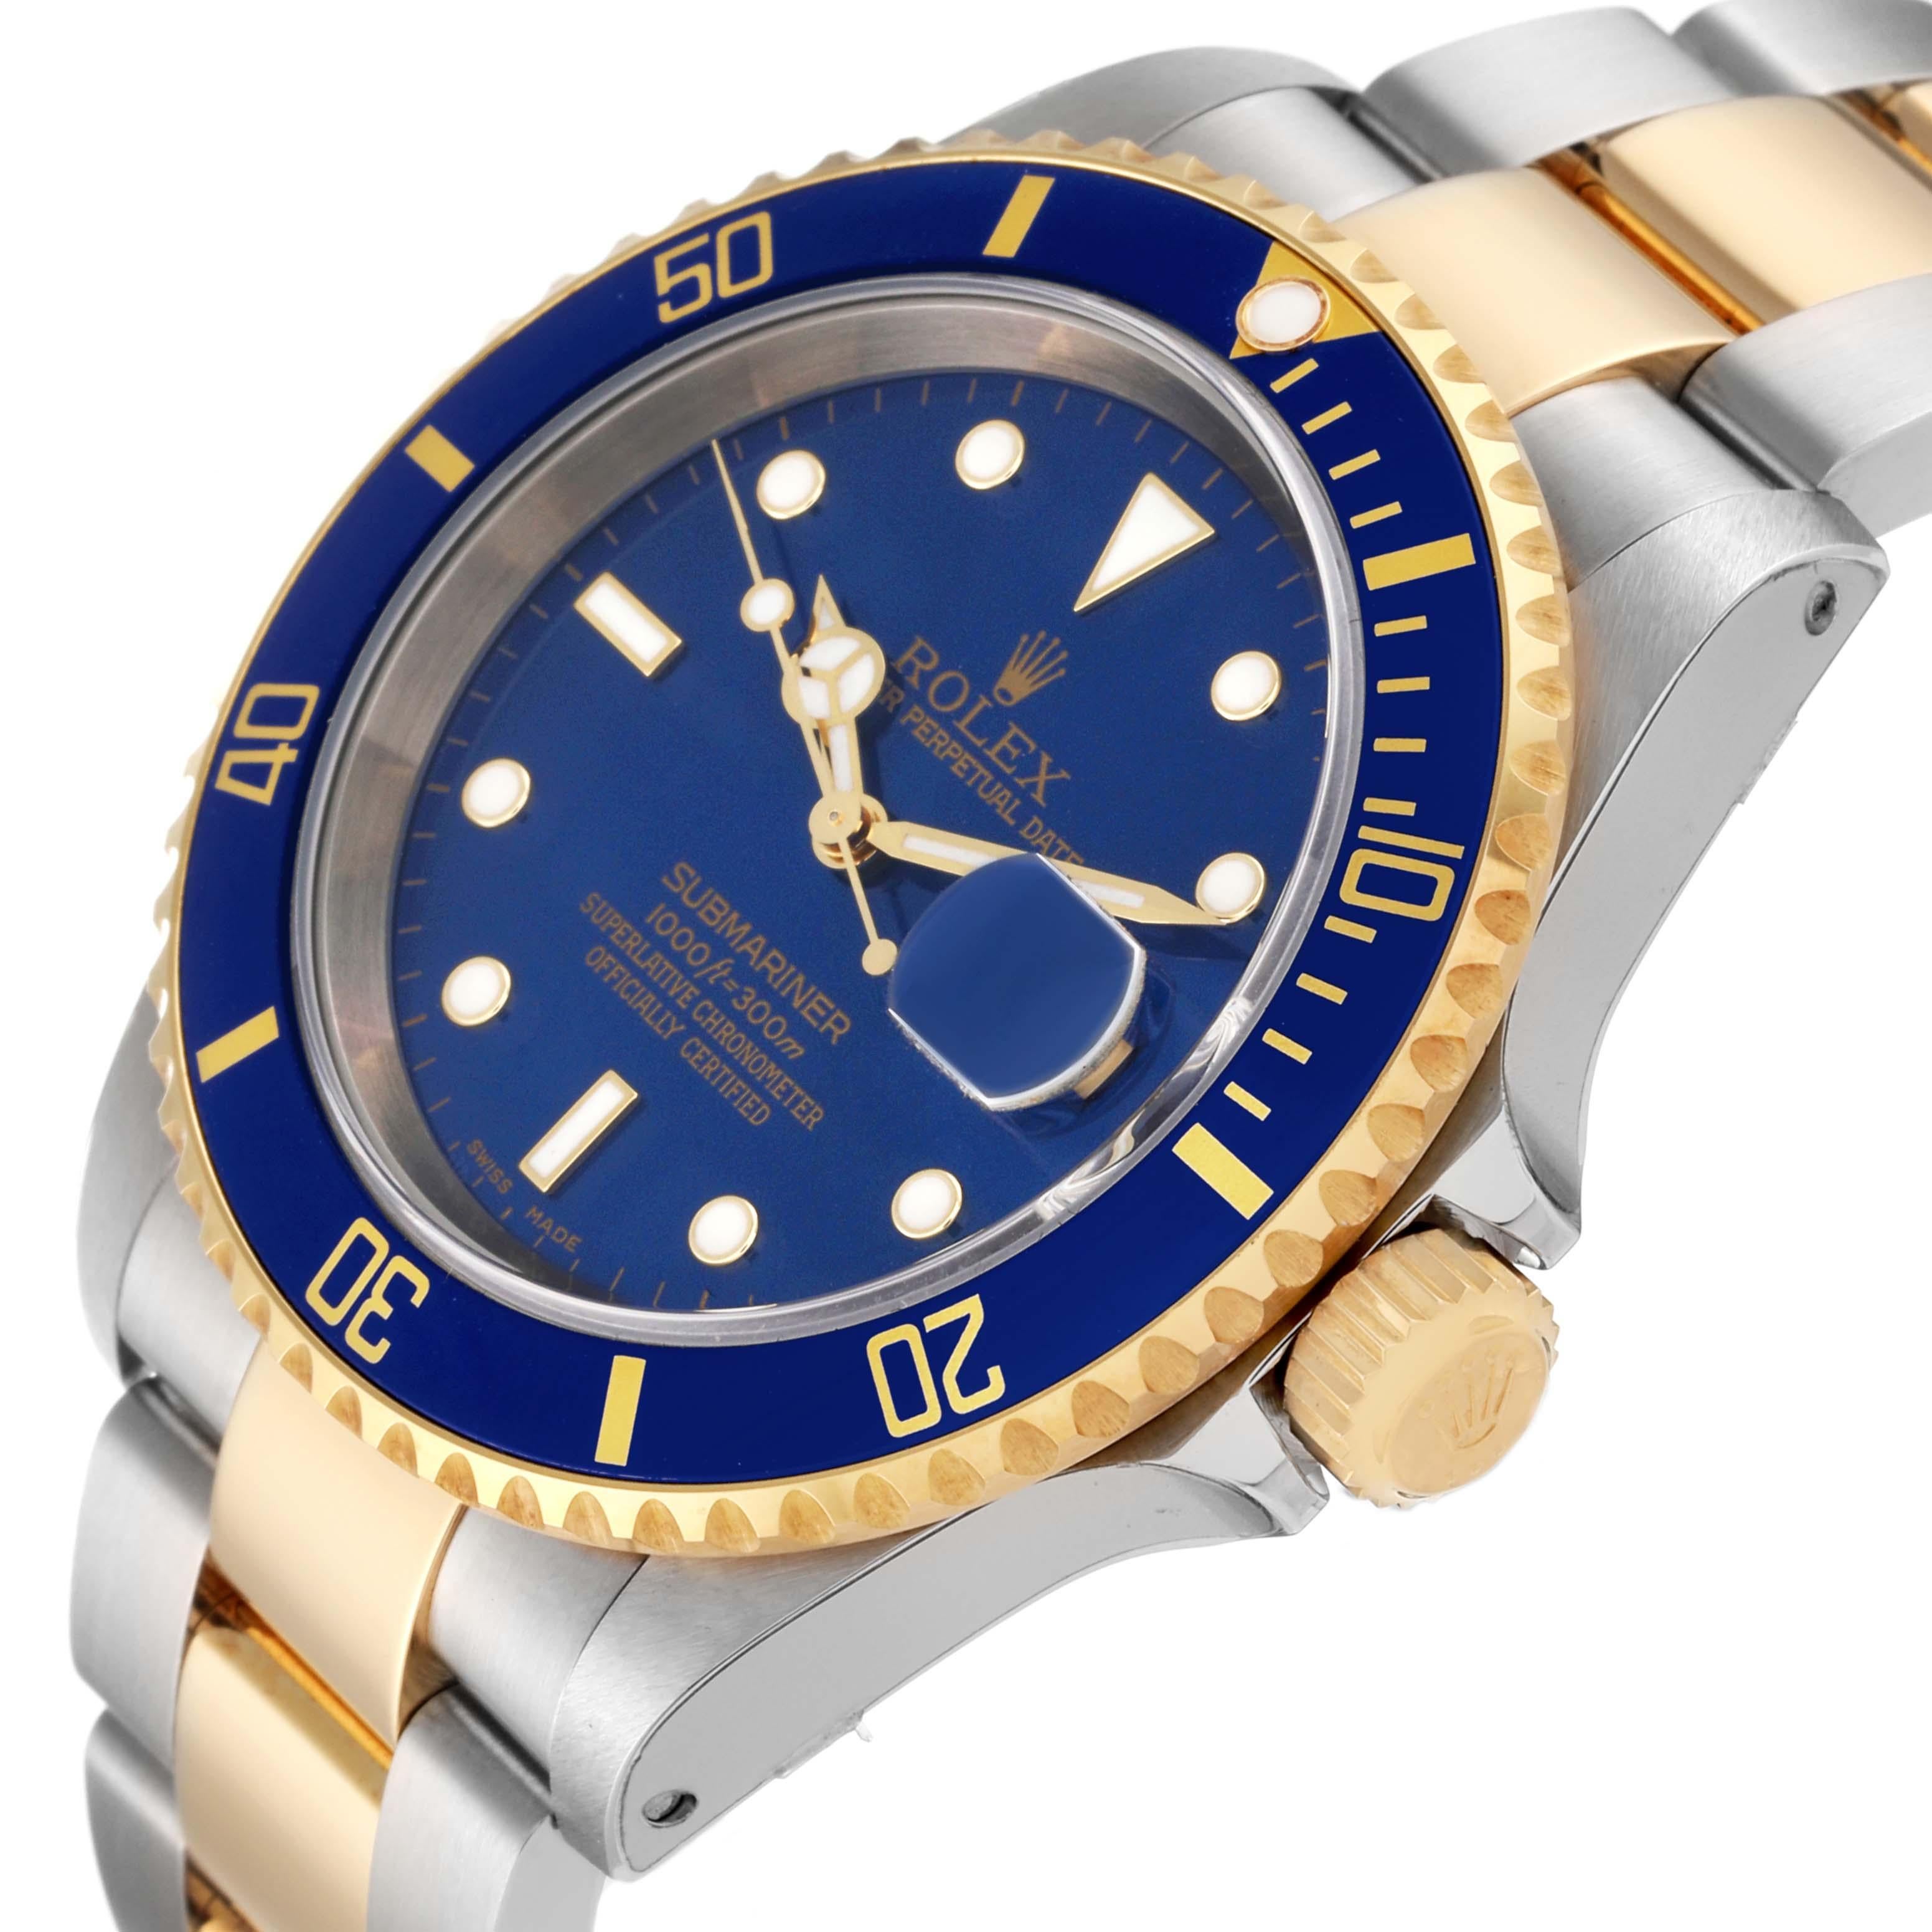 Rolex Submariner Blue Dial Steel Yellow Gold Mens Watch 16613 1